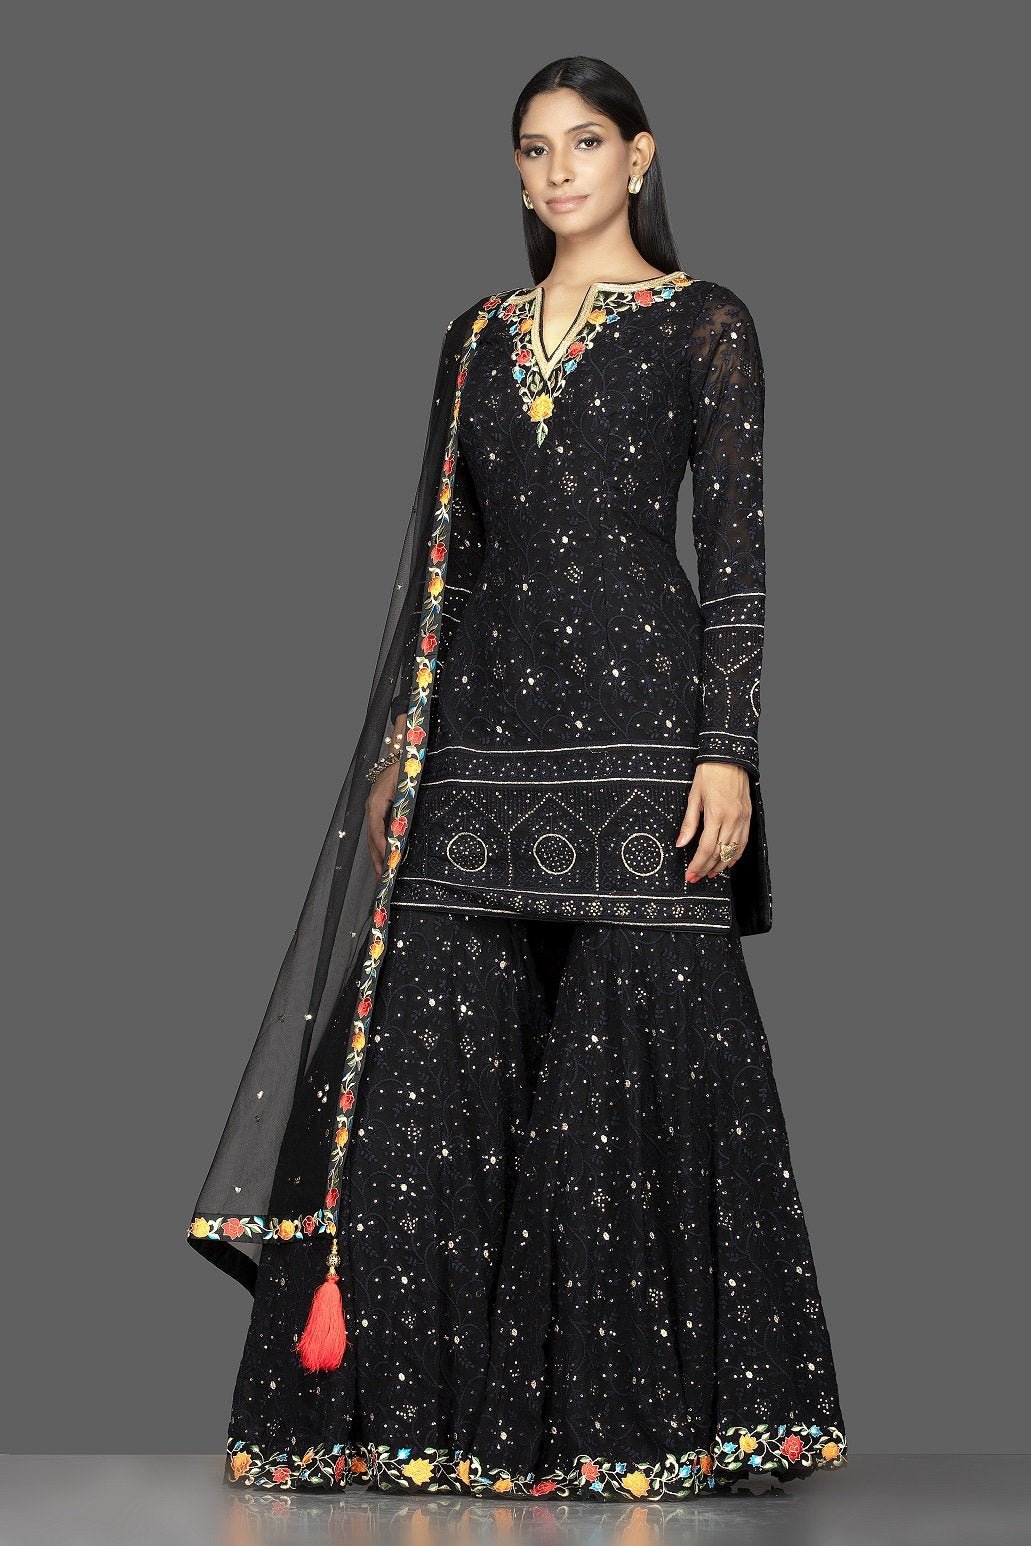 Buy stunning black georgette Lucknowi work garara suit online in USA with dupatta. Spread ethnic elegance on weddings and special occasions in splendid designer lehengas, Anarkali suits crafted with exquisite Indian craftsmanship from Pure Elegance Indian fashion store in USA.-side